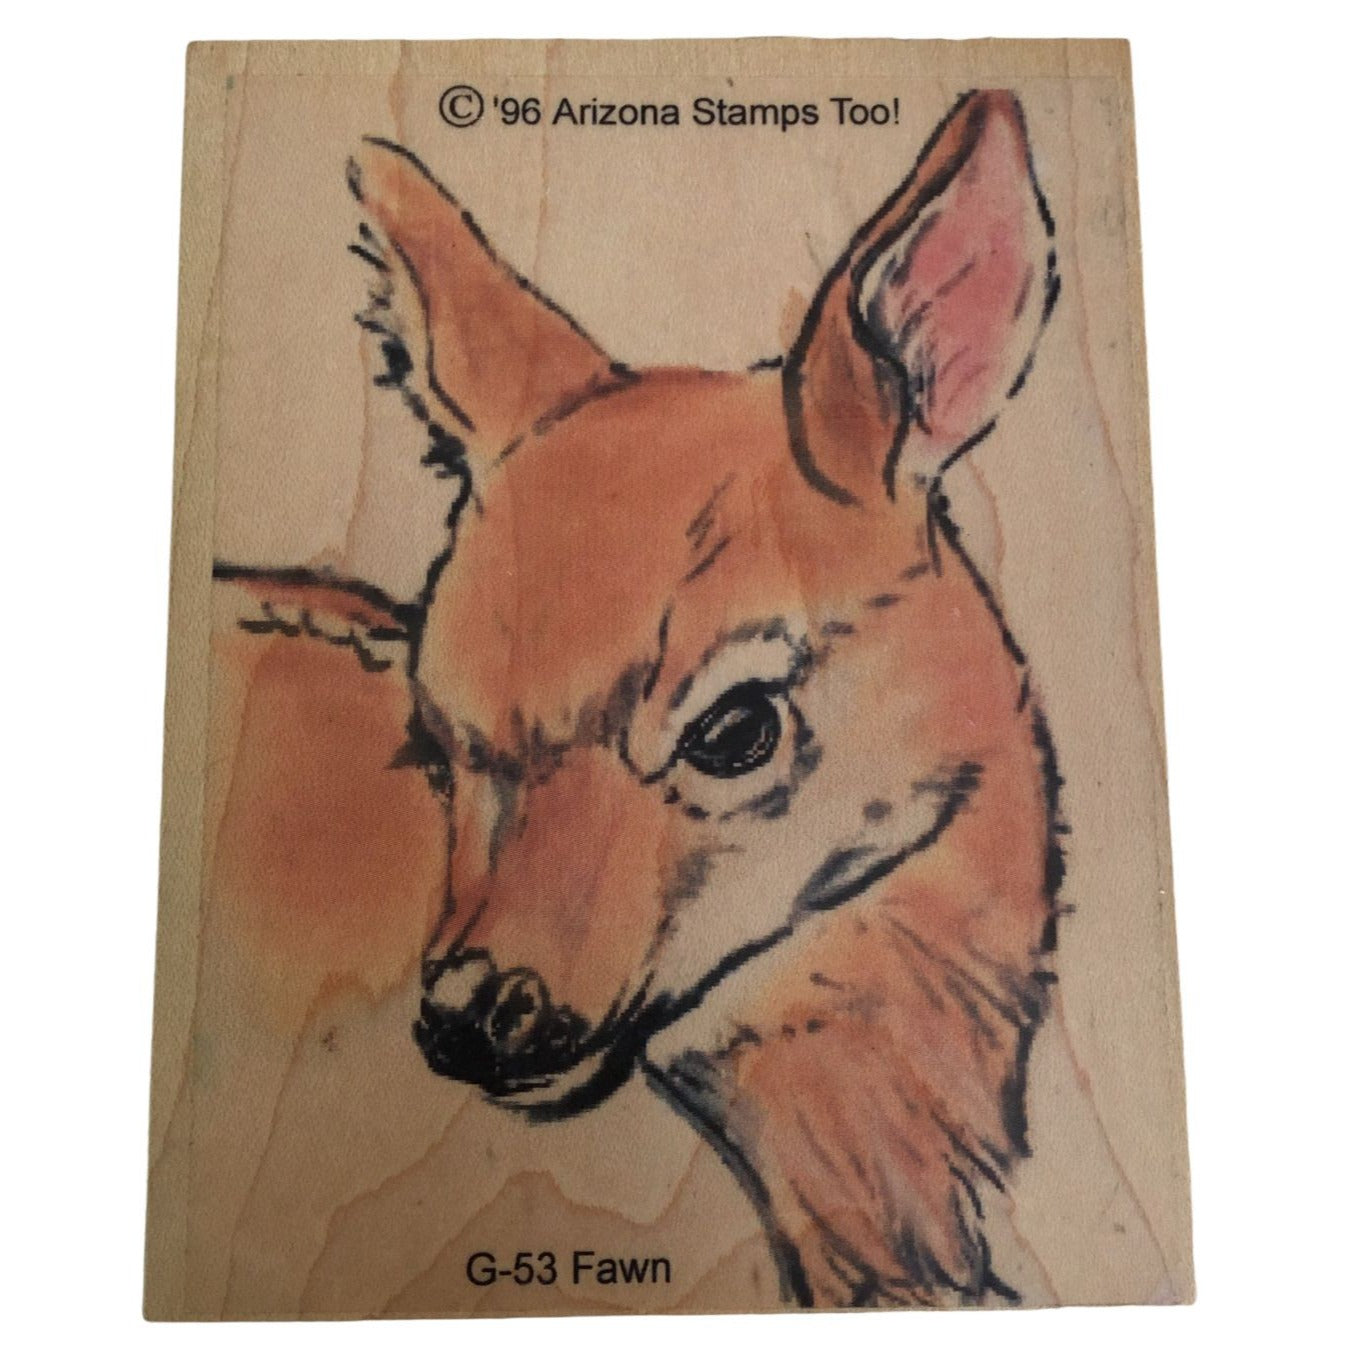 Arizona Stamps Too Rubber Stamp Fawn Baby Animal Face Forest Nature Card Making